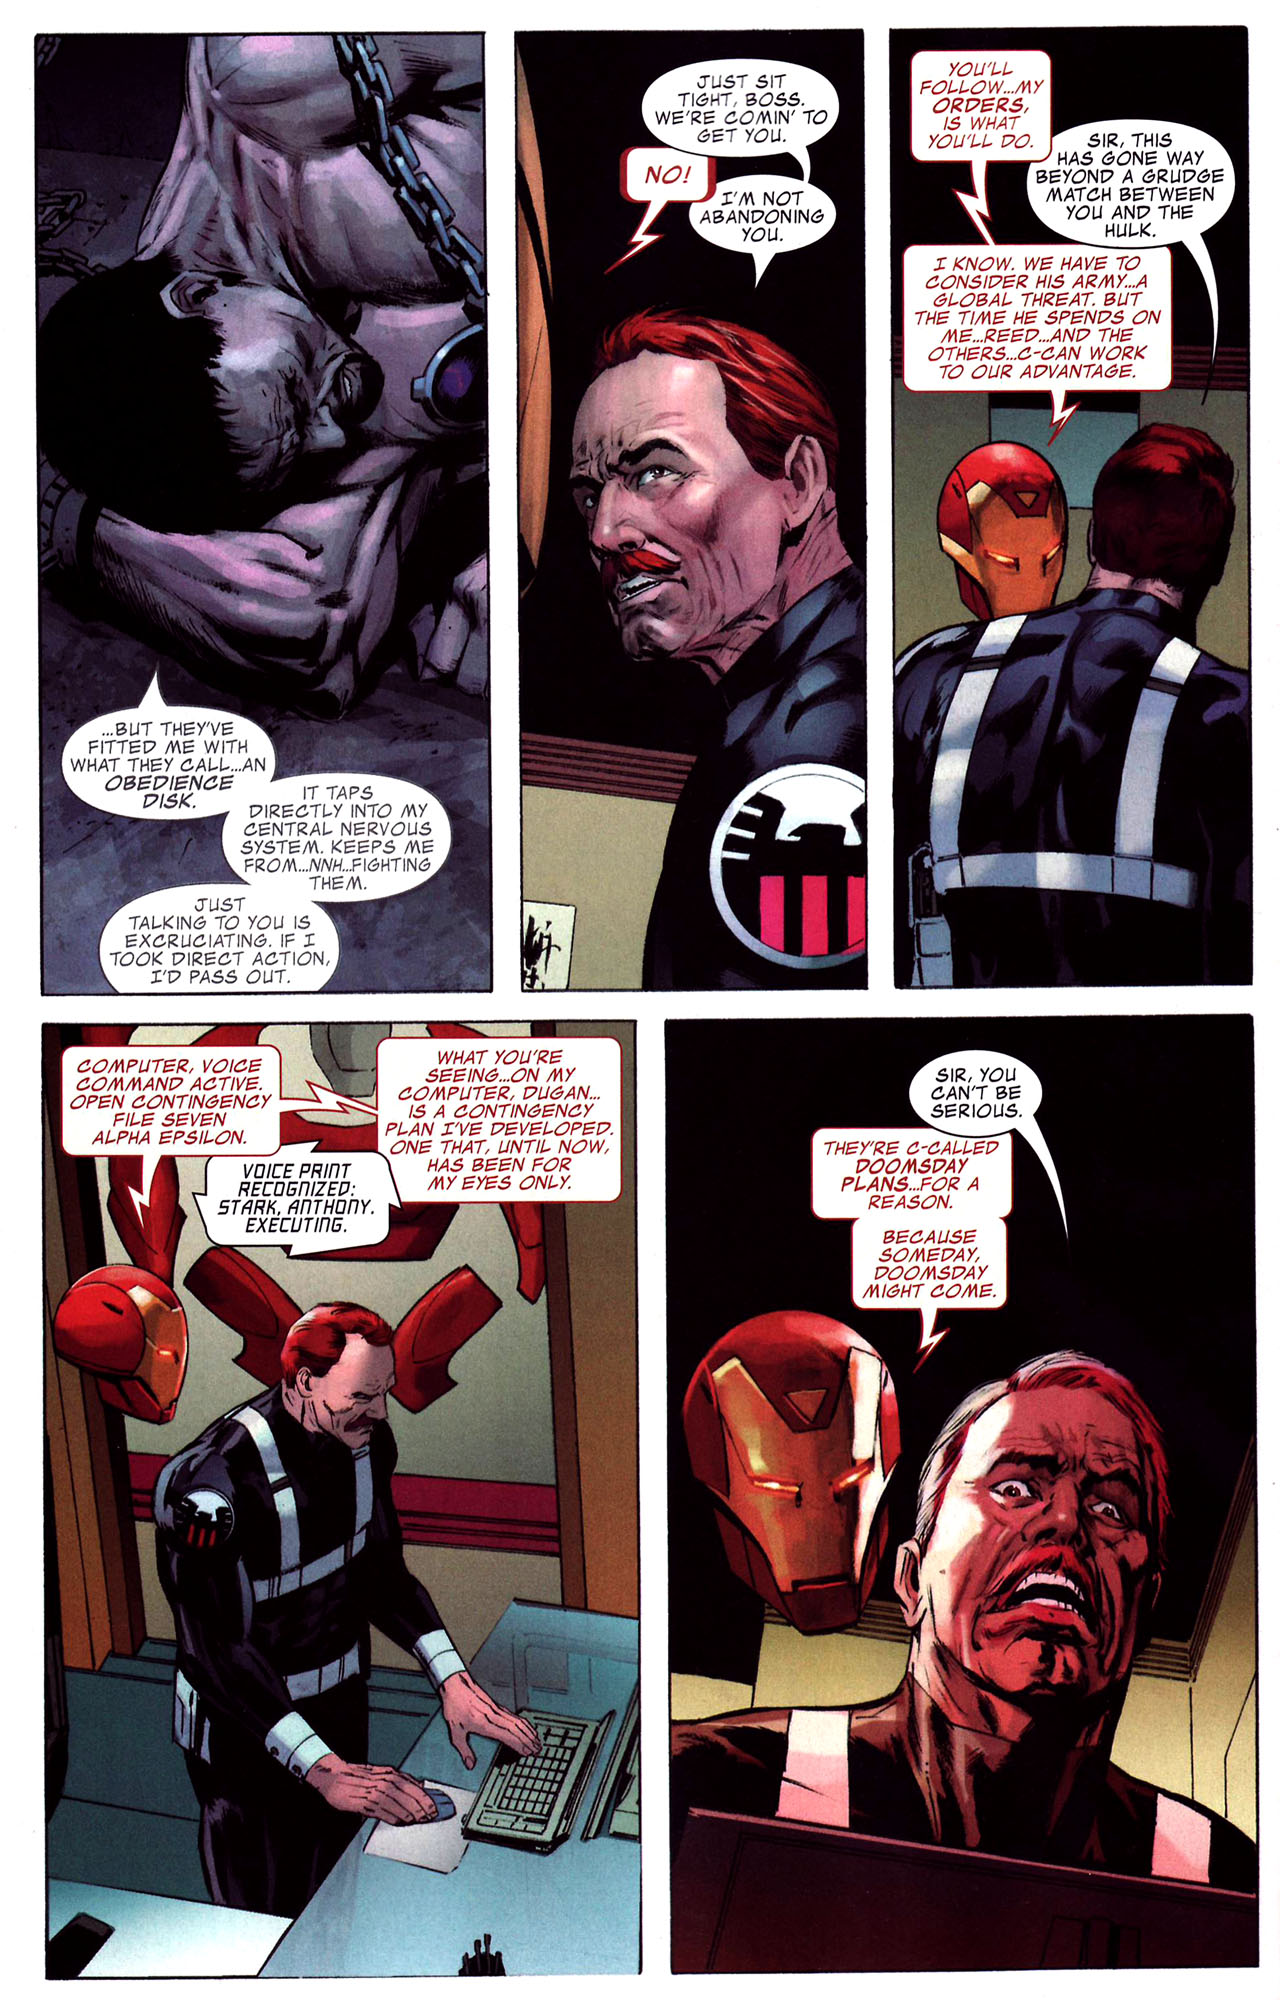 The Invincible Iron Man (2007) 20 Page 15